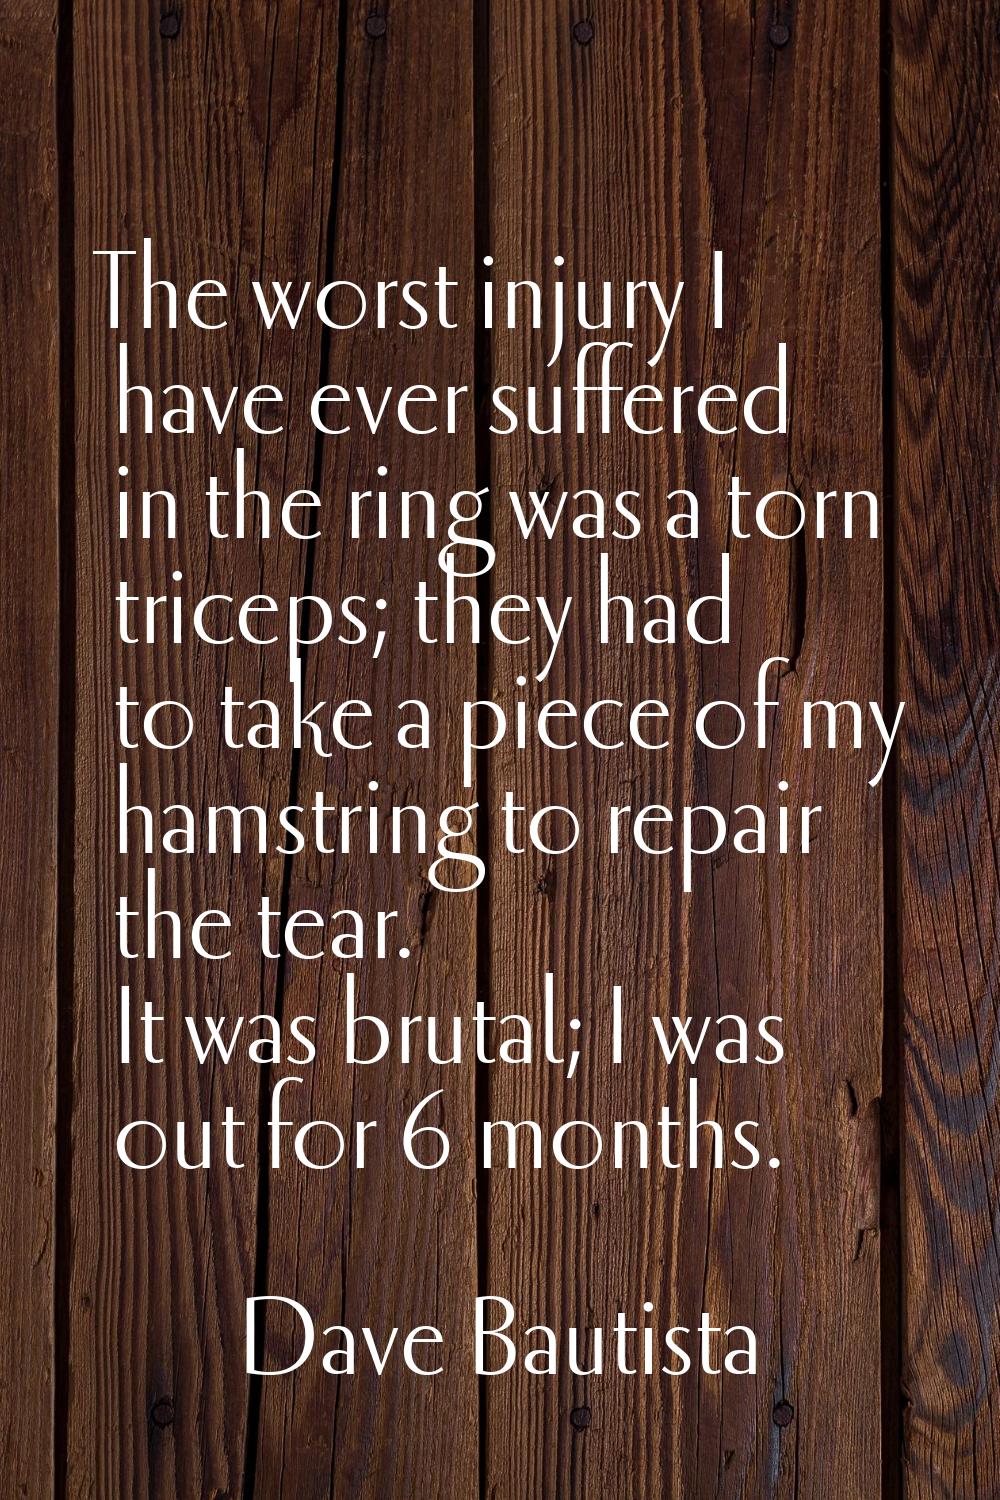 The worst injury I have ever suffered in the ring was a torn triceps; they had to take a piece of m